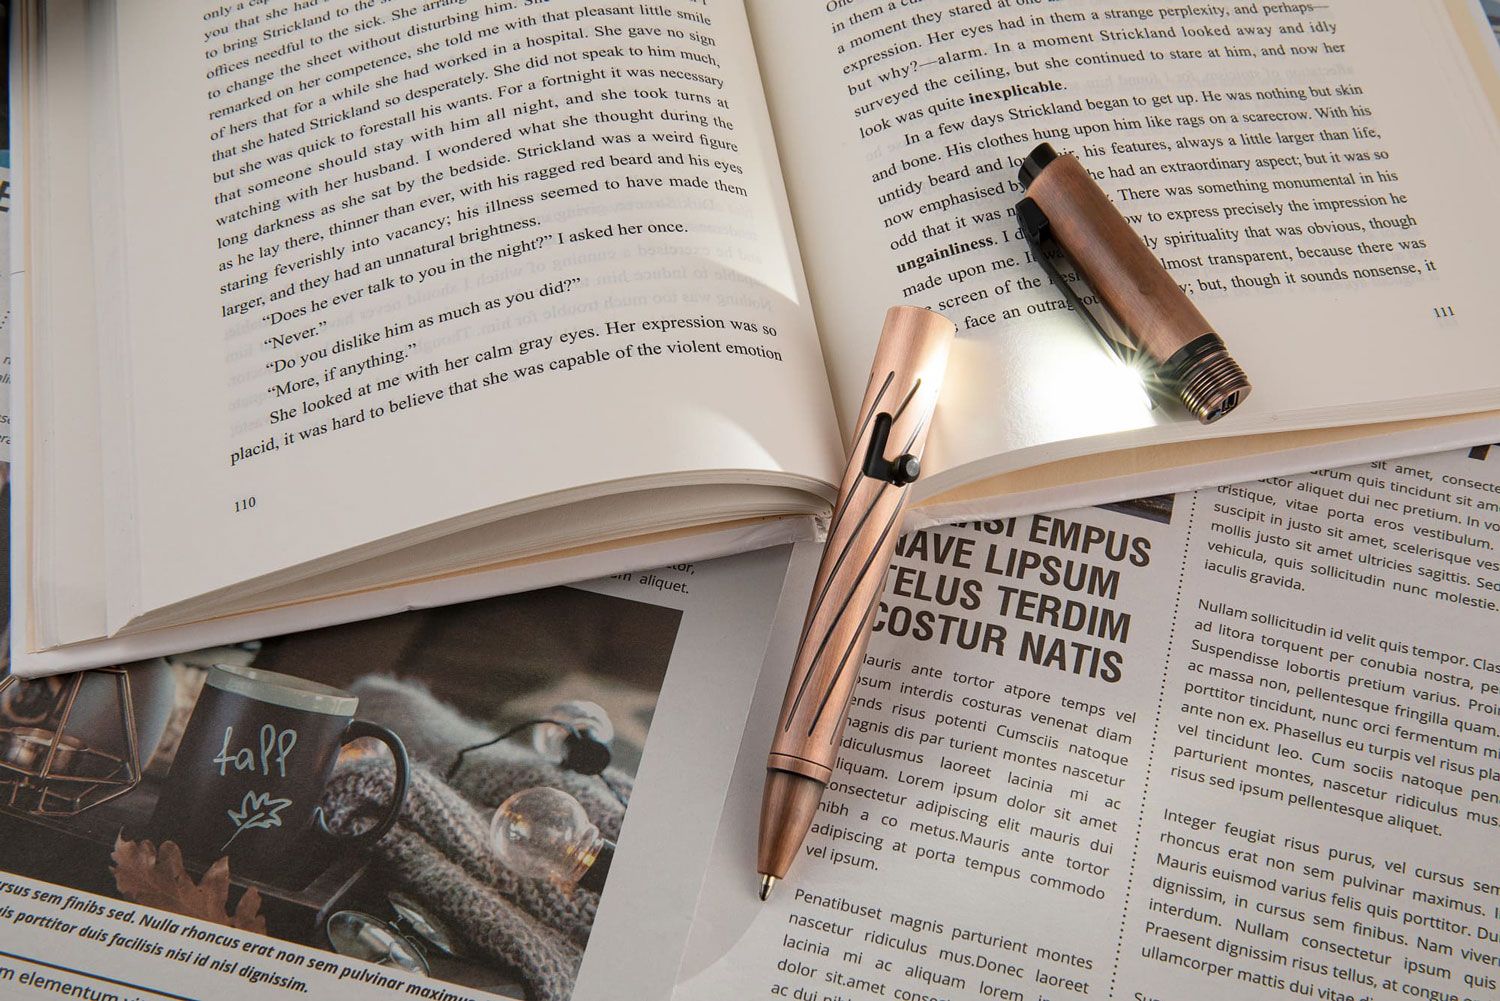 Olight Limited Edition O'Pen Pro Pen Copper with Integrated Rechargeable  LED Flashlight and Laser Pointer 120 Max Lumens